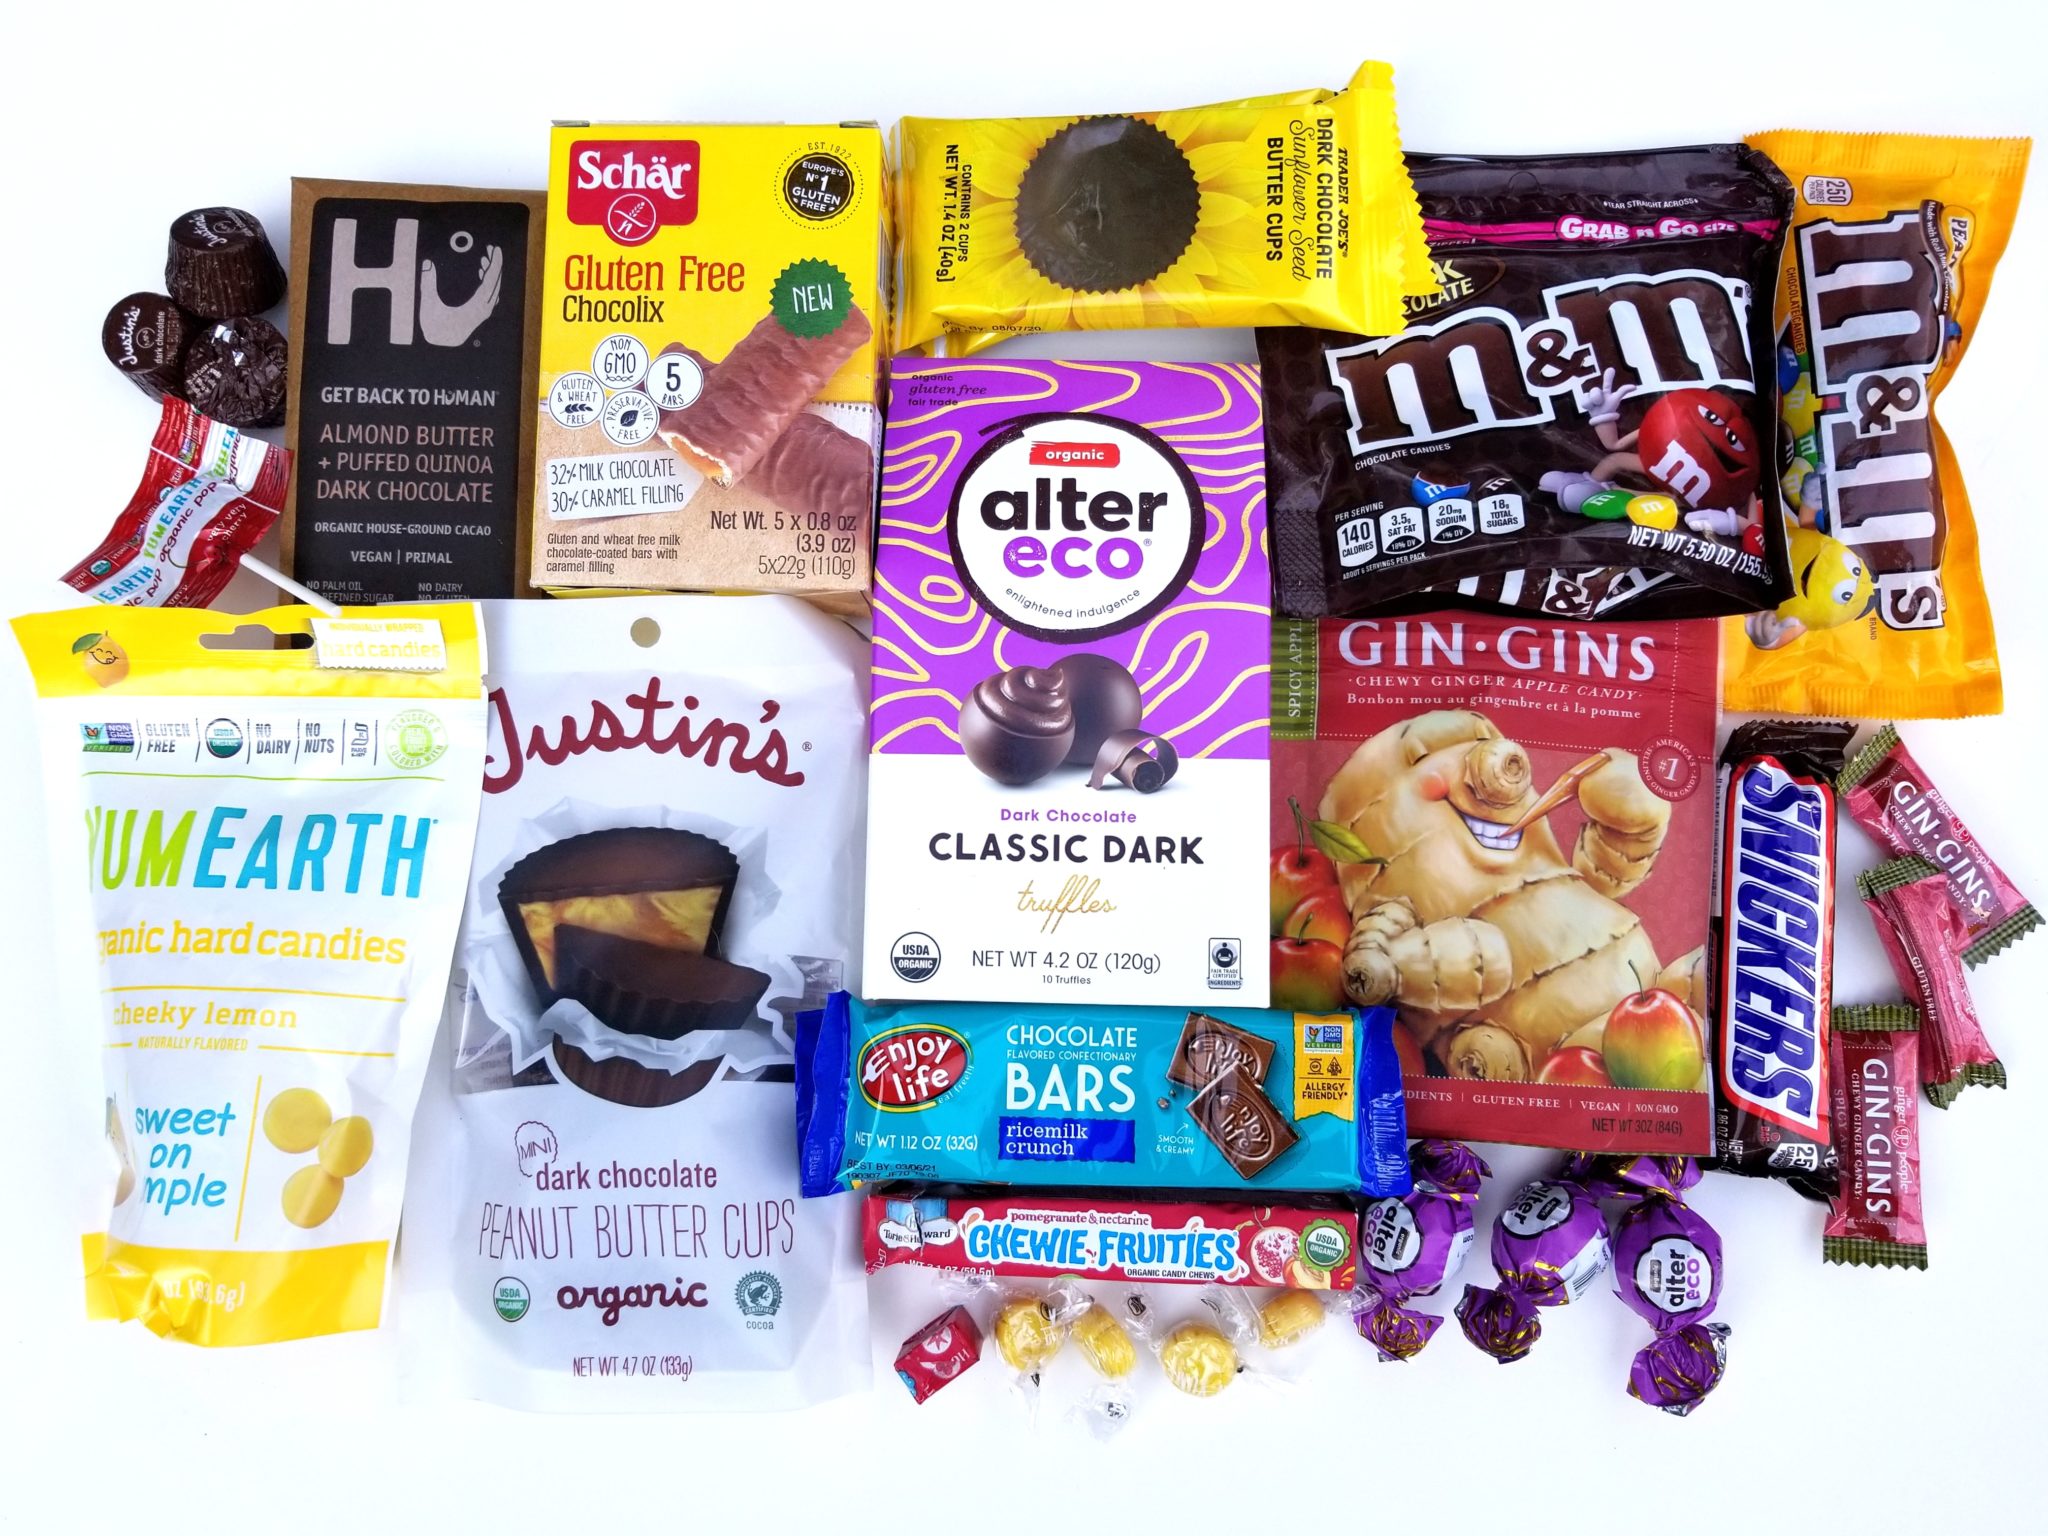 find-out-our-favorite-gluten-free-candy-options-in-this-best-gluten